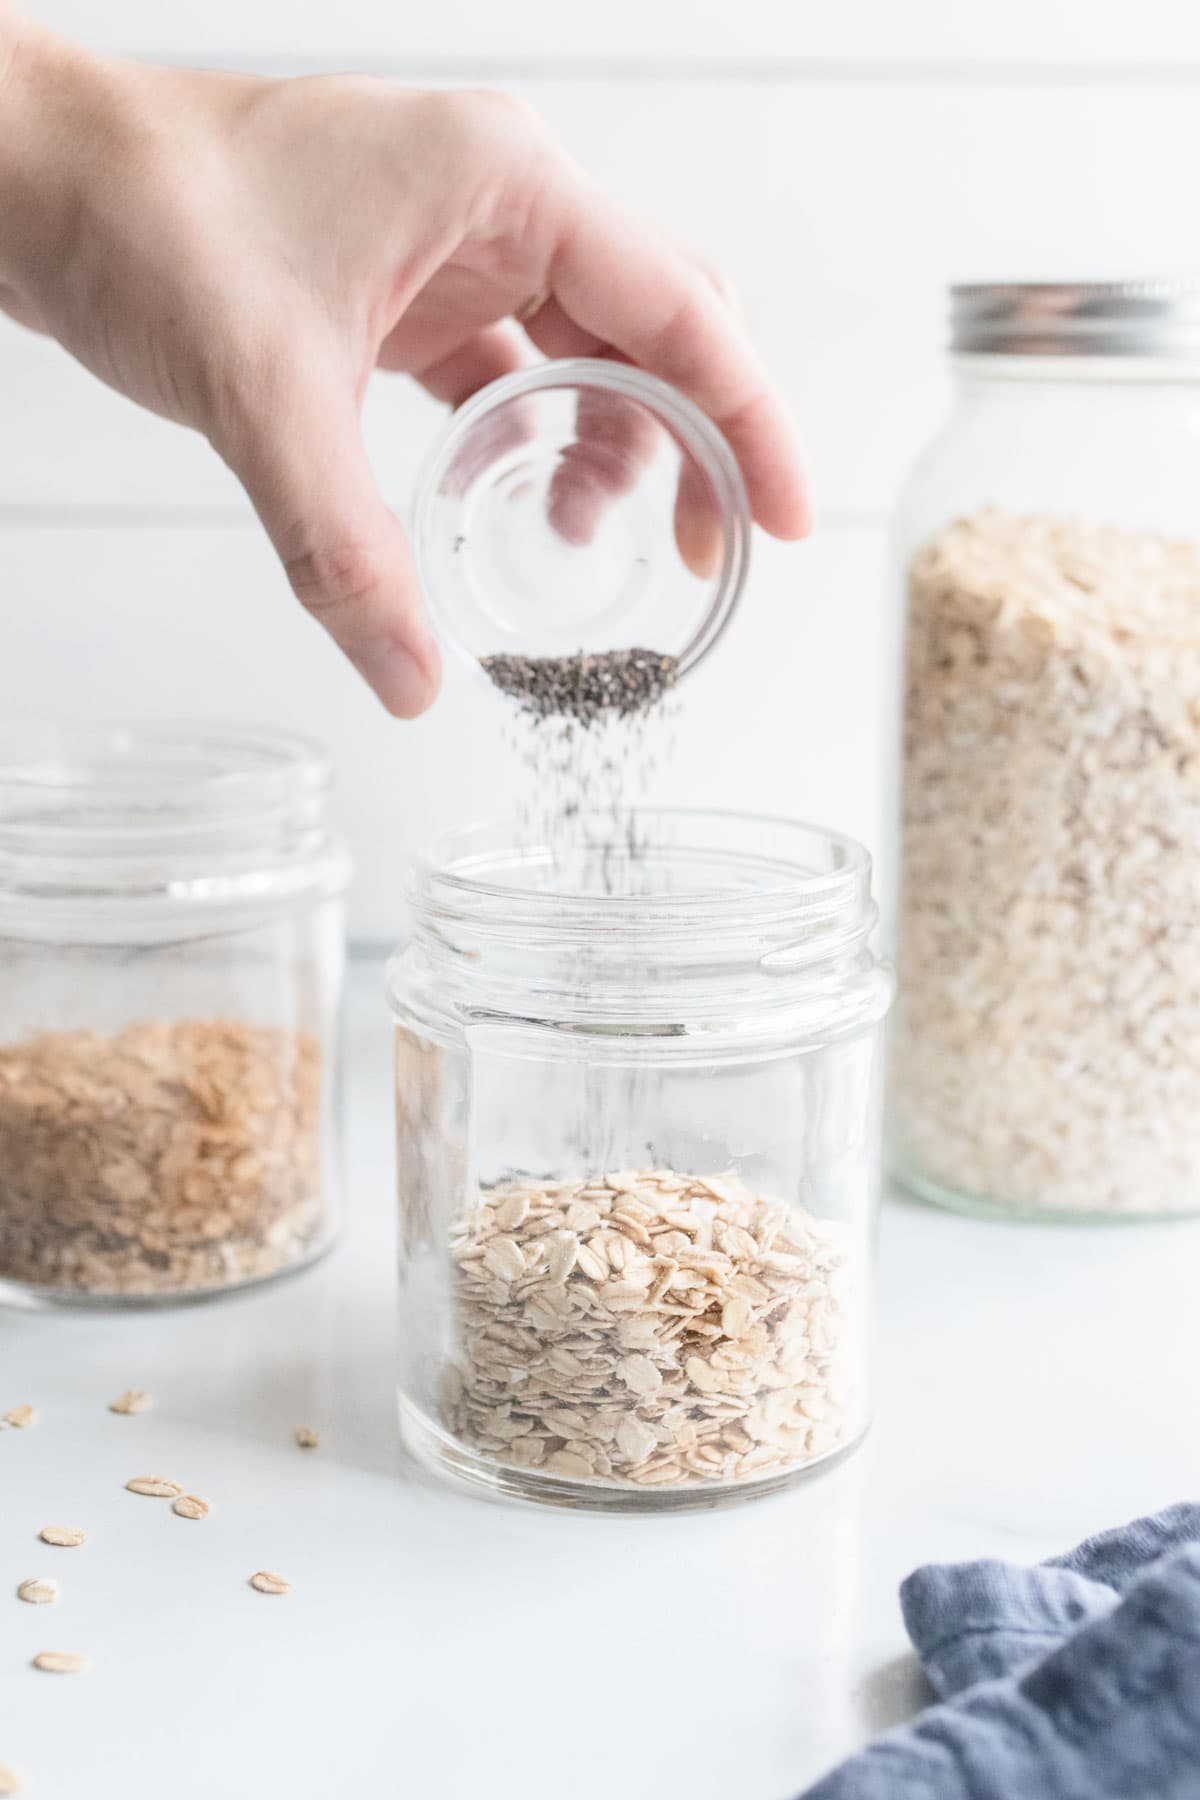 A hand pouring chia seeds into a jar of oats.